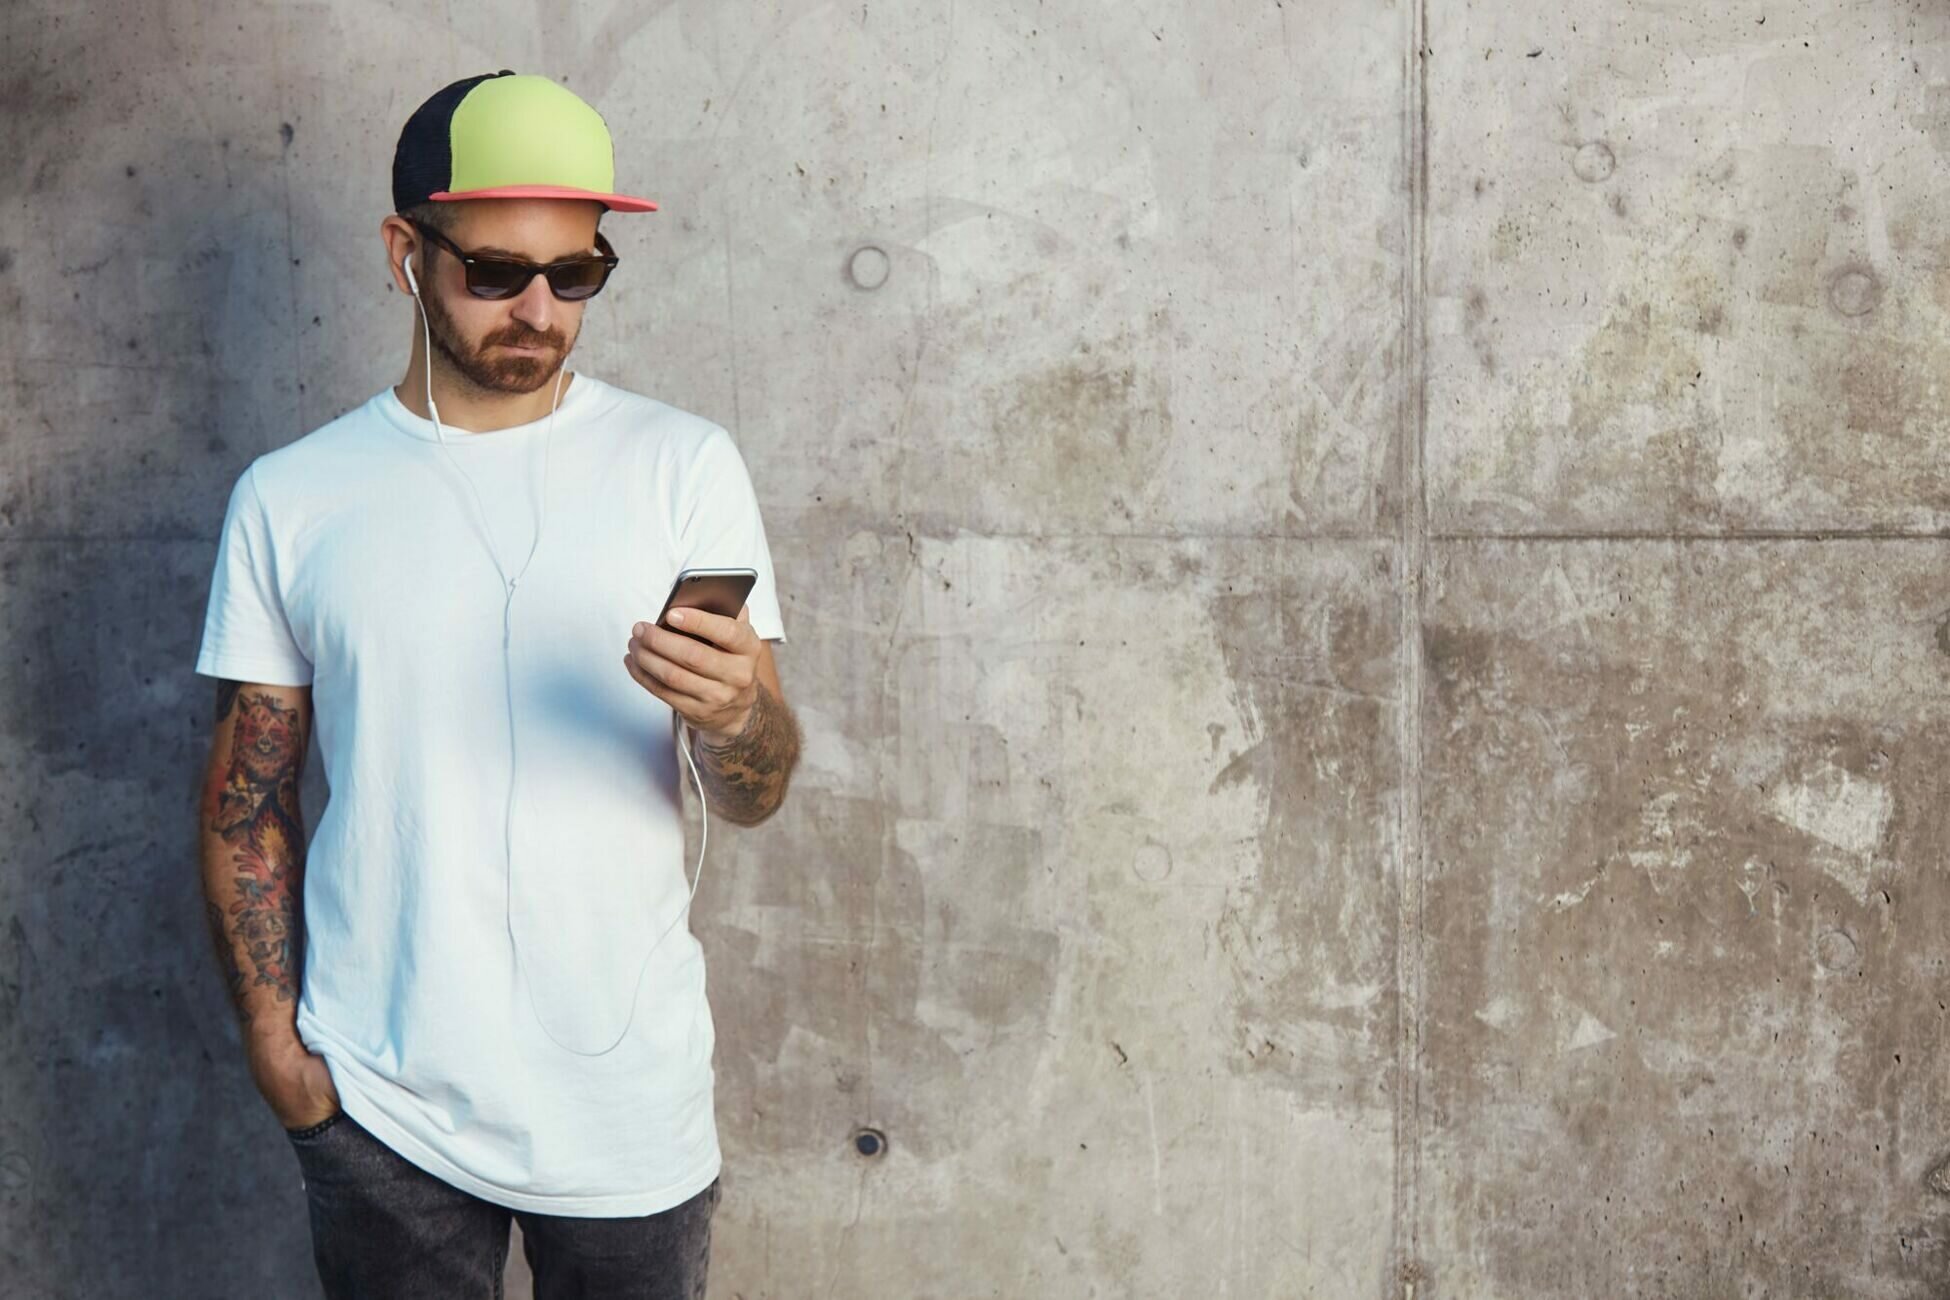 young-man-in-baseball-cap-sunglasses-and-white-blank-t-shirt-reading-something-on-his-smartphone-standing-next-to-a-gray-concrete-wall